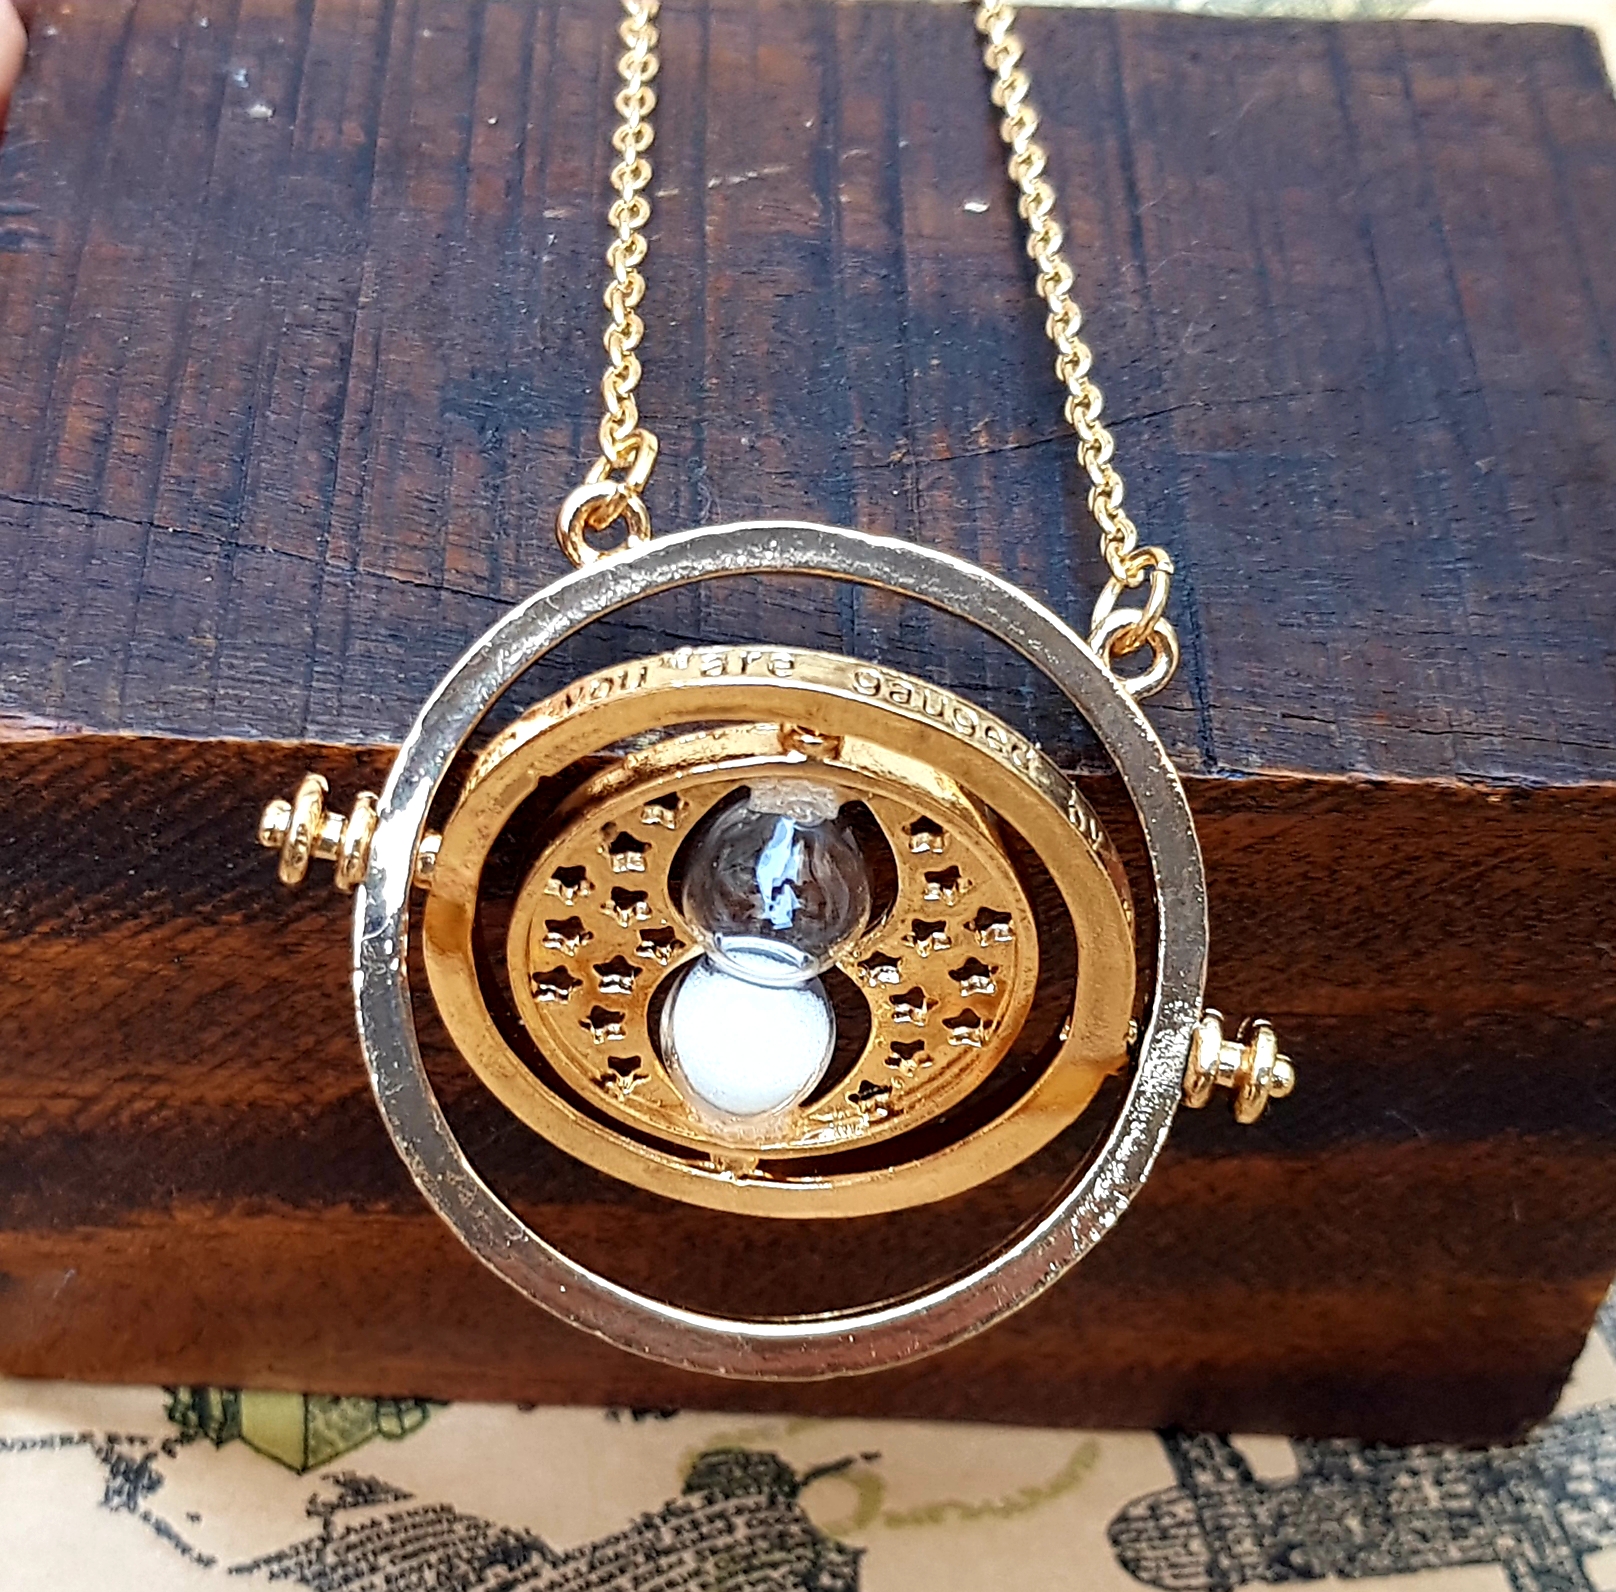 Hermione Granger's Time Turner : Amazon.ca: Clothing, Shoes & Accessories